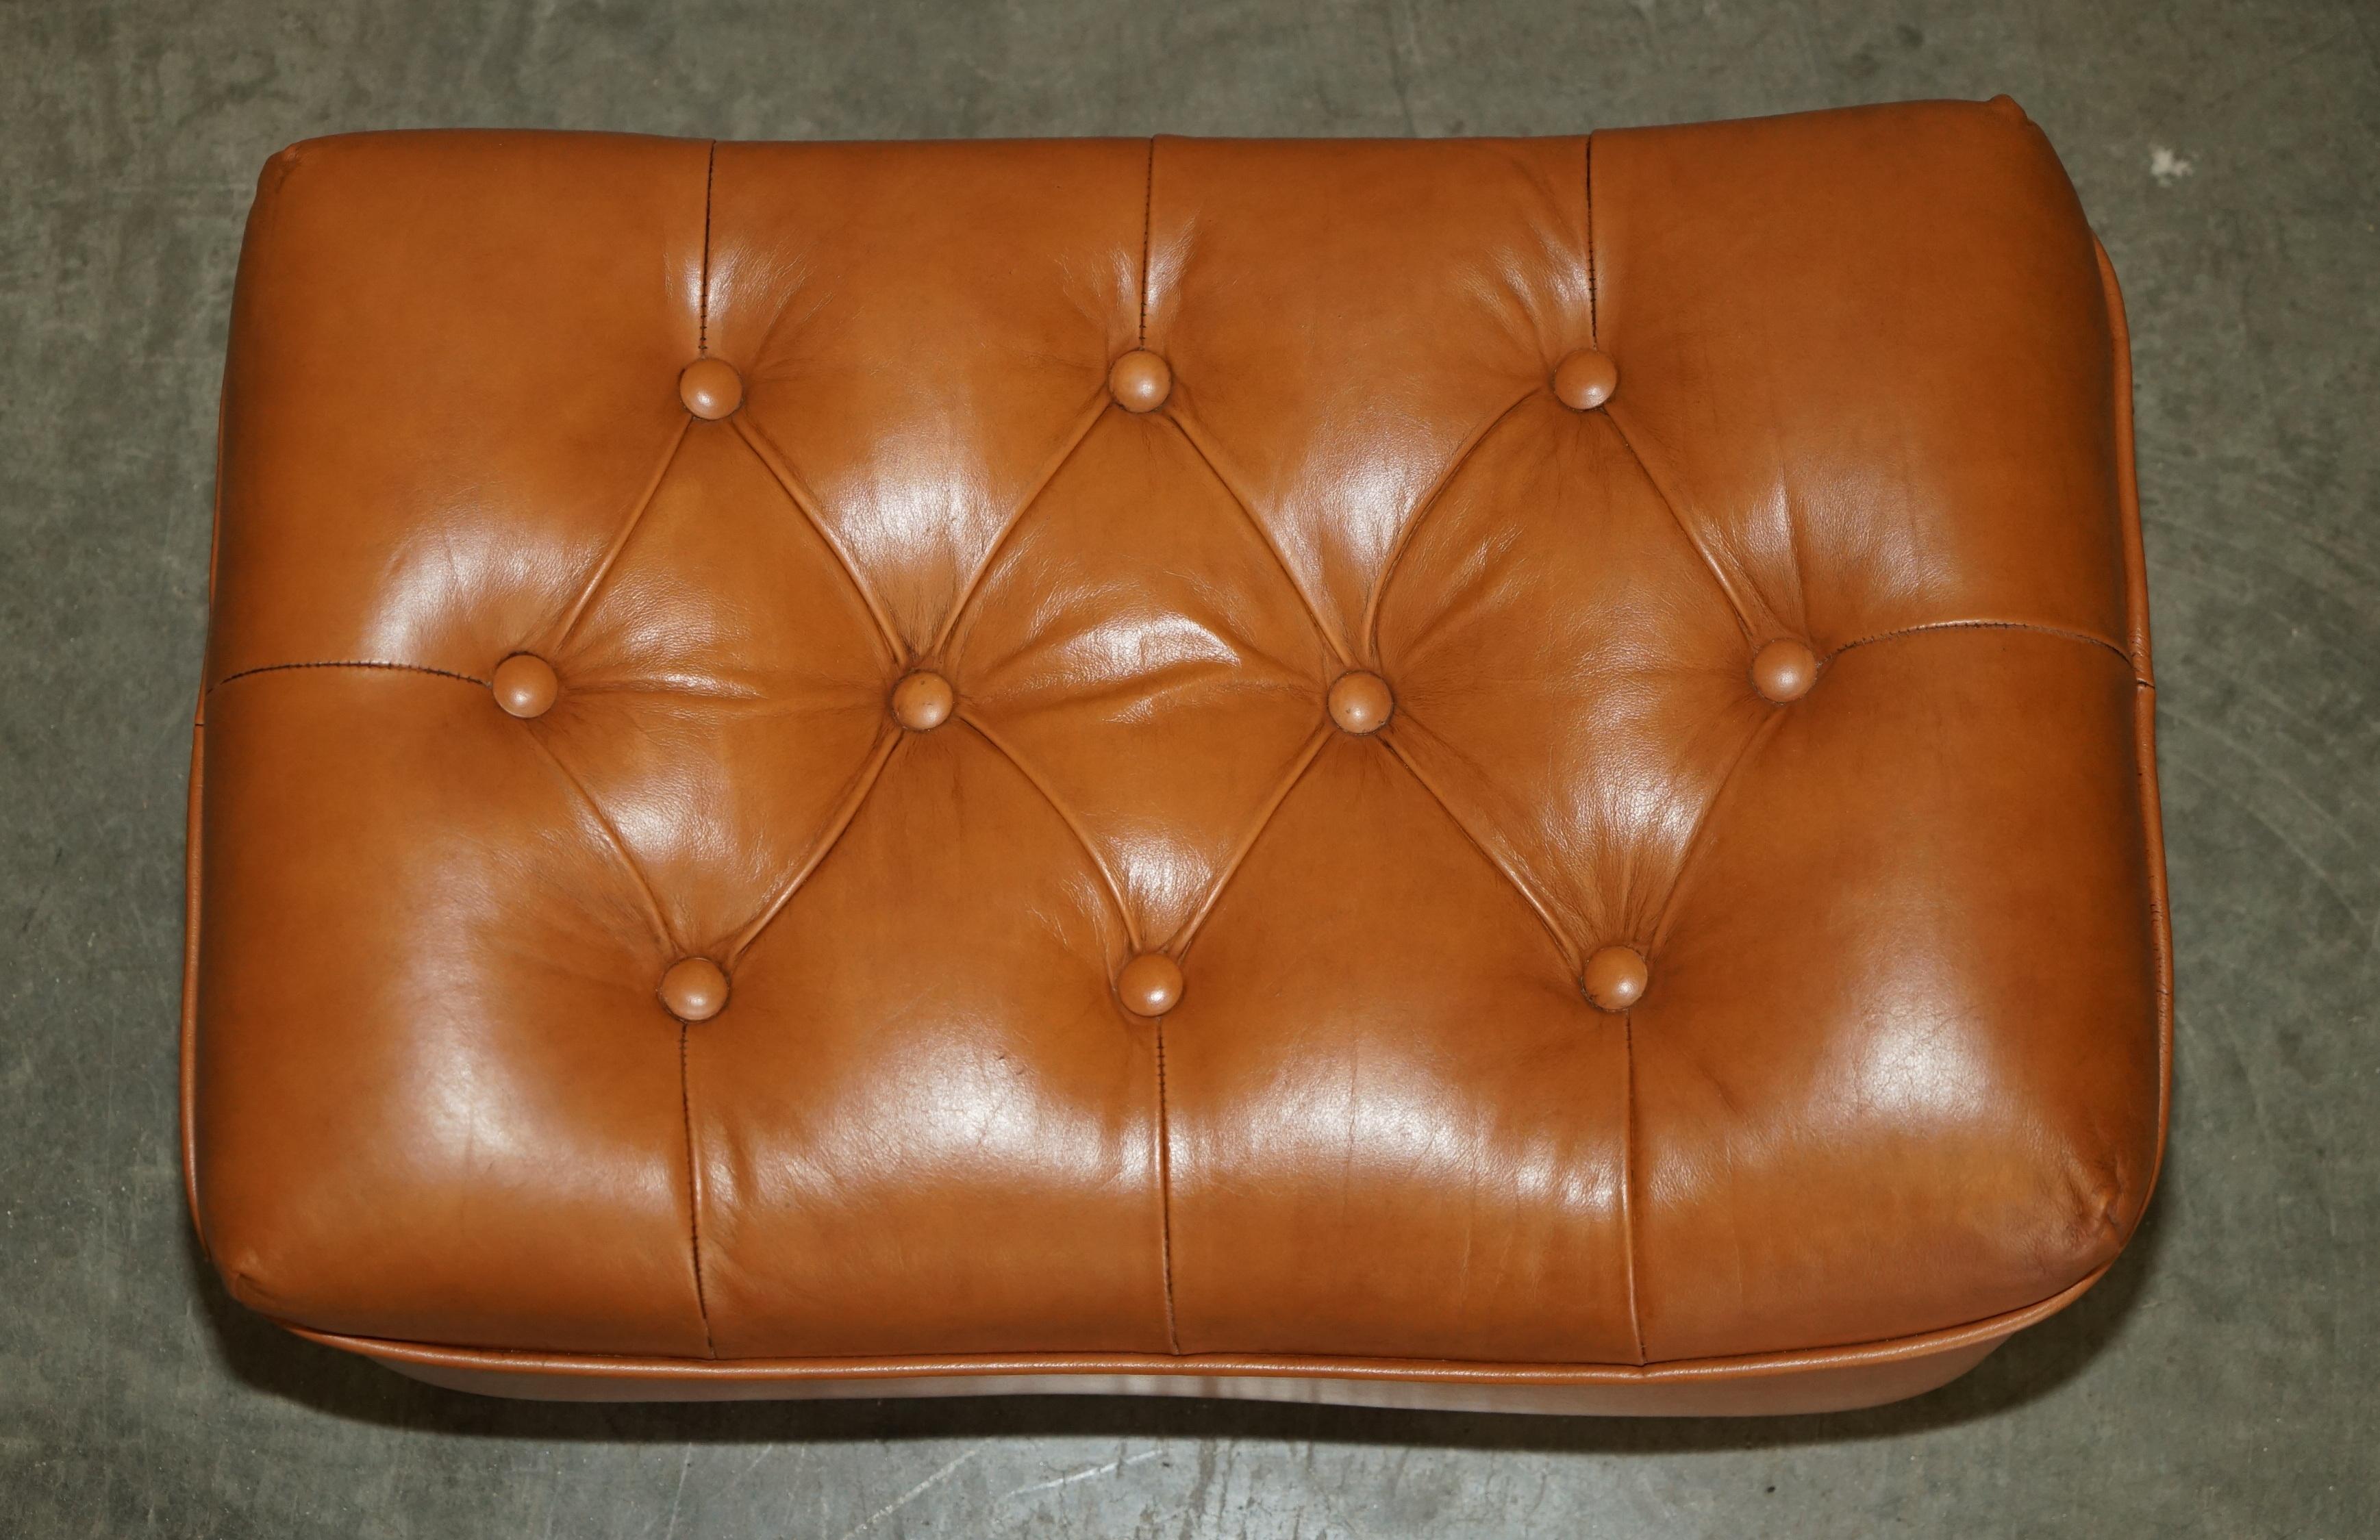 English FINE VINTAGE MiD CENTURY MODERN TAN BROWN LEATHER CHESTERFIELD TUFTED FOOTSTOOL